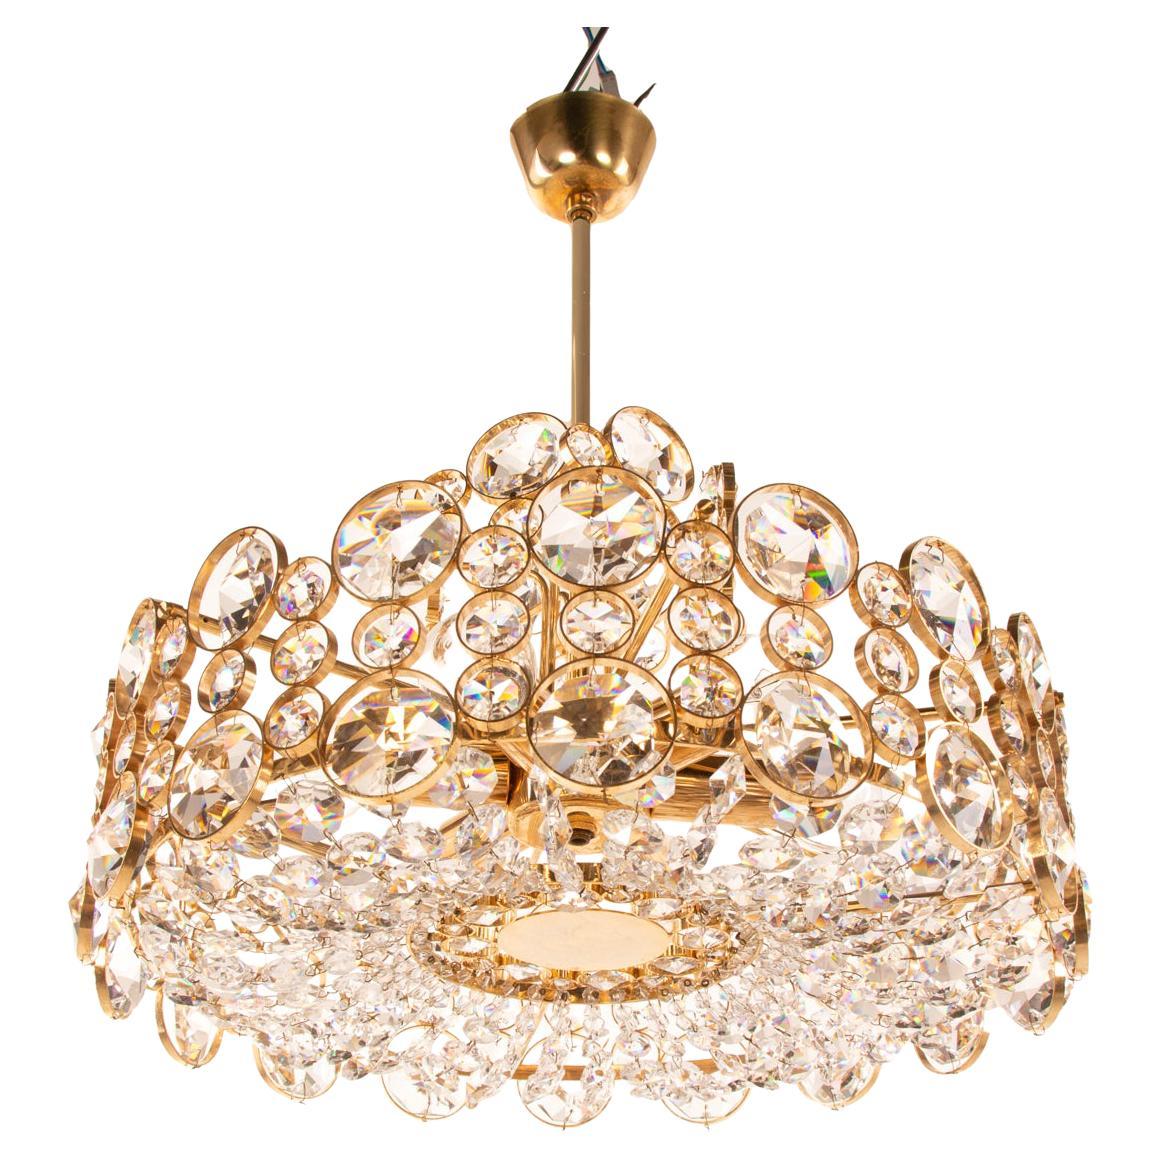 Glamorous bubble chandelier is made of a 24-carat gold-plated brass frame with crystal prisms and gilt brass rings. Manufactured by Palwa (Palme & Walter), Germany in the 1960s. 

Style: Hollywood Regency. 
Colors: clear and golden. 
Materials: